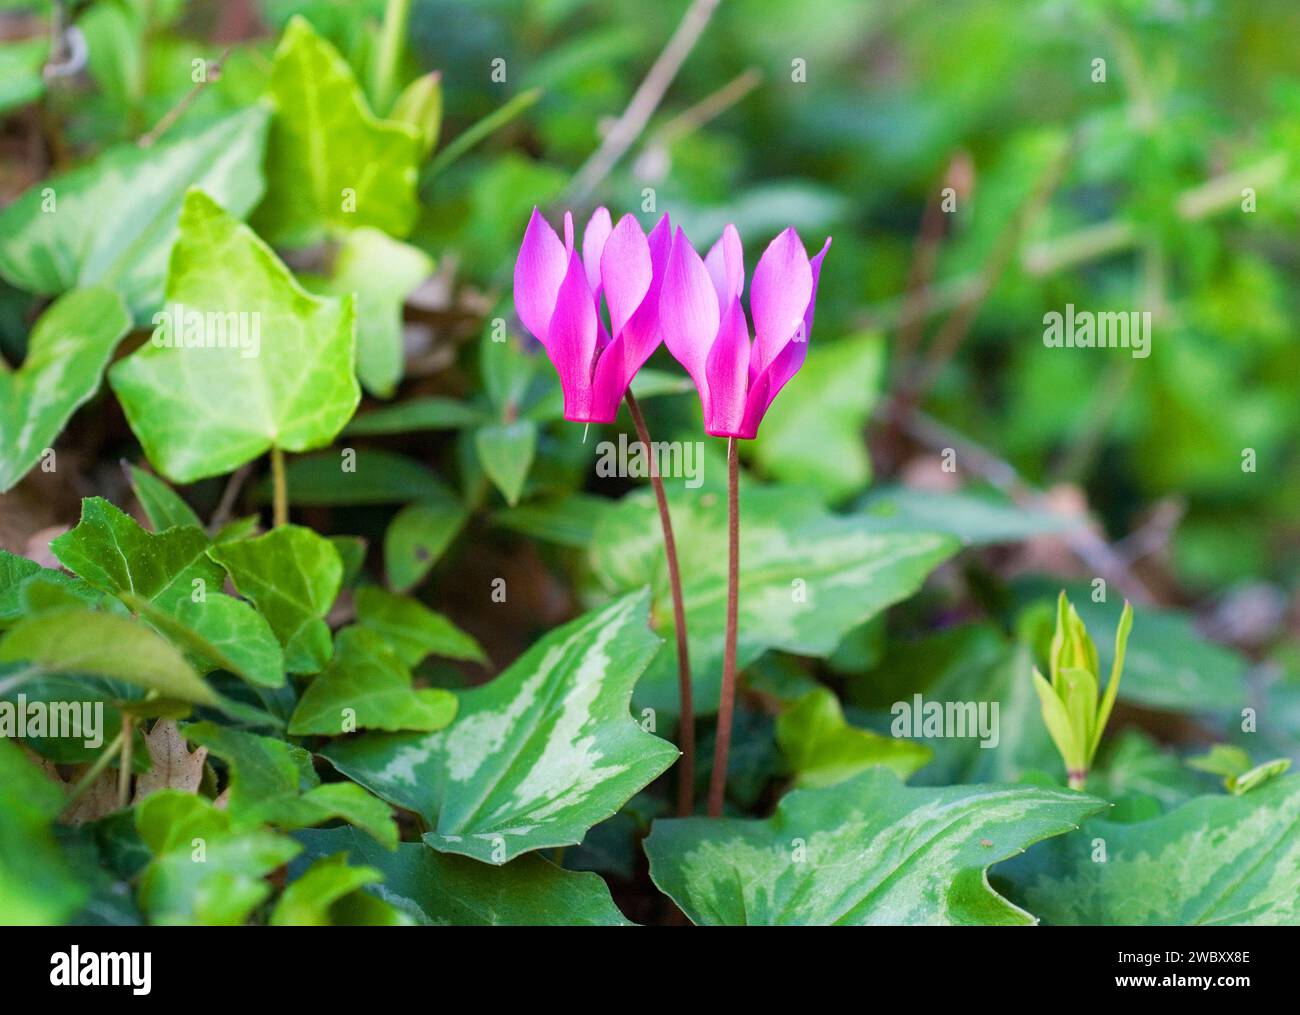 two flowers of Cyclamen, Spring Sowbread (Cyclamen Repandum) standing in common ivy, English ivy, European ivy  (Hedera helix) Montepulciano Stock Photo